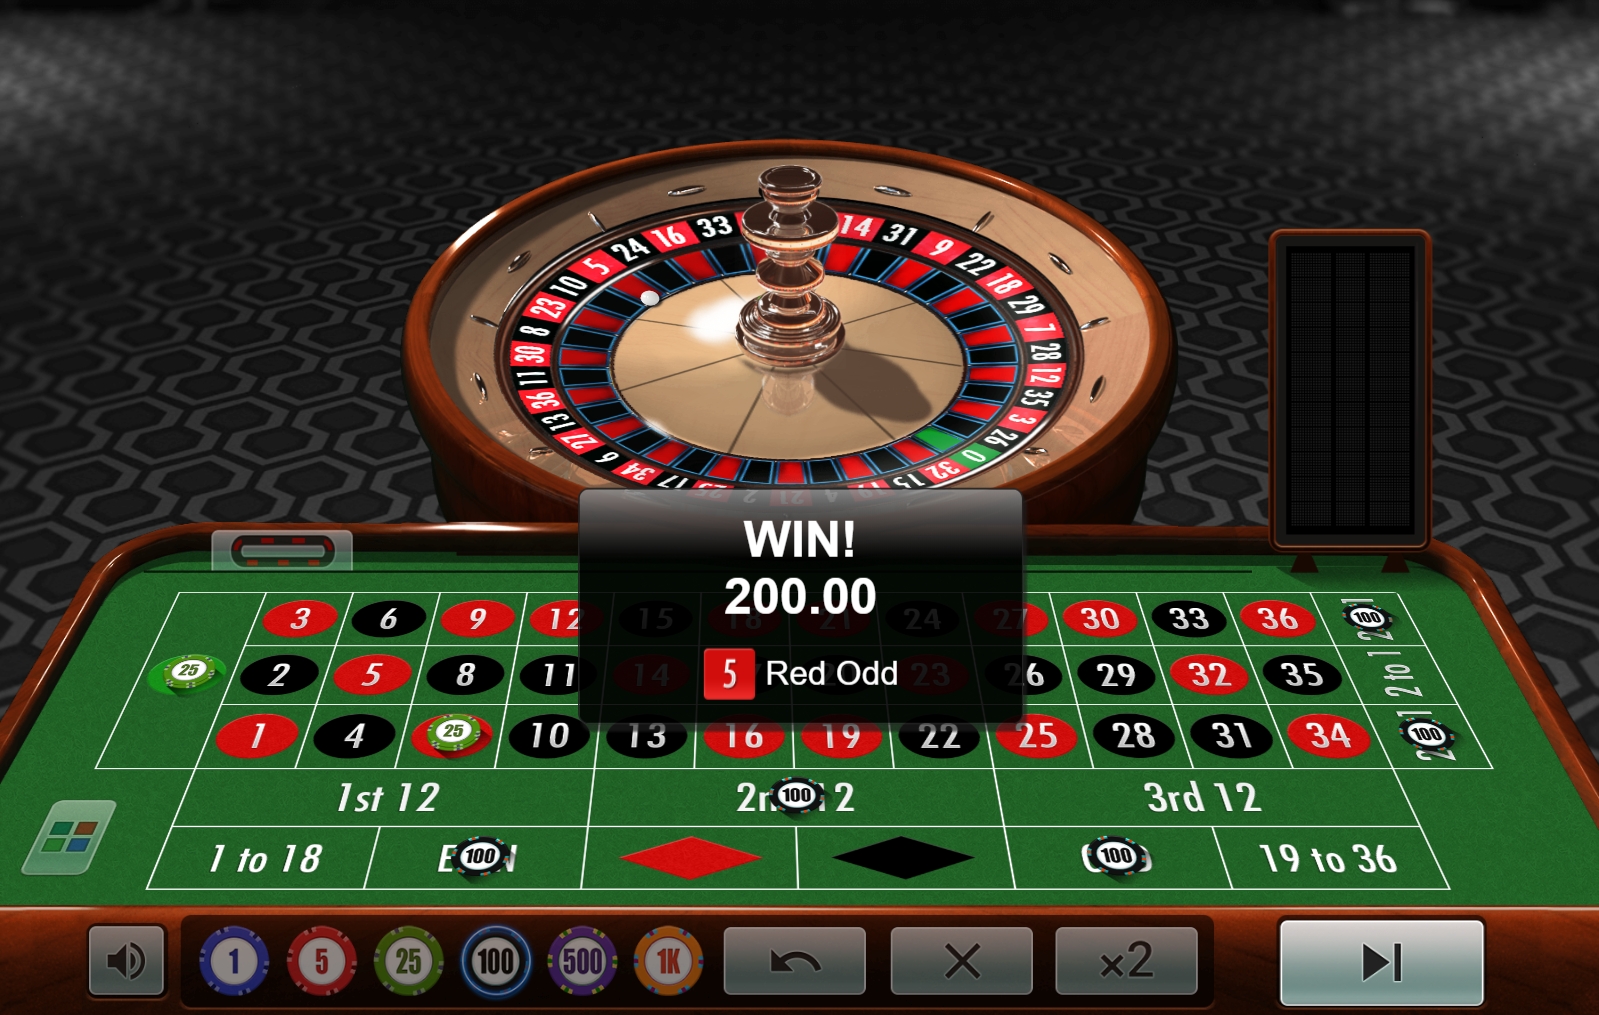 Online casino offering free kino top roulette and слоты игровые автоматы 2020